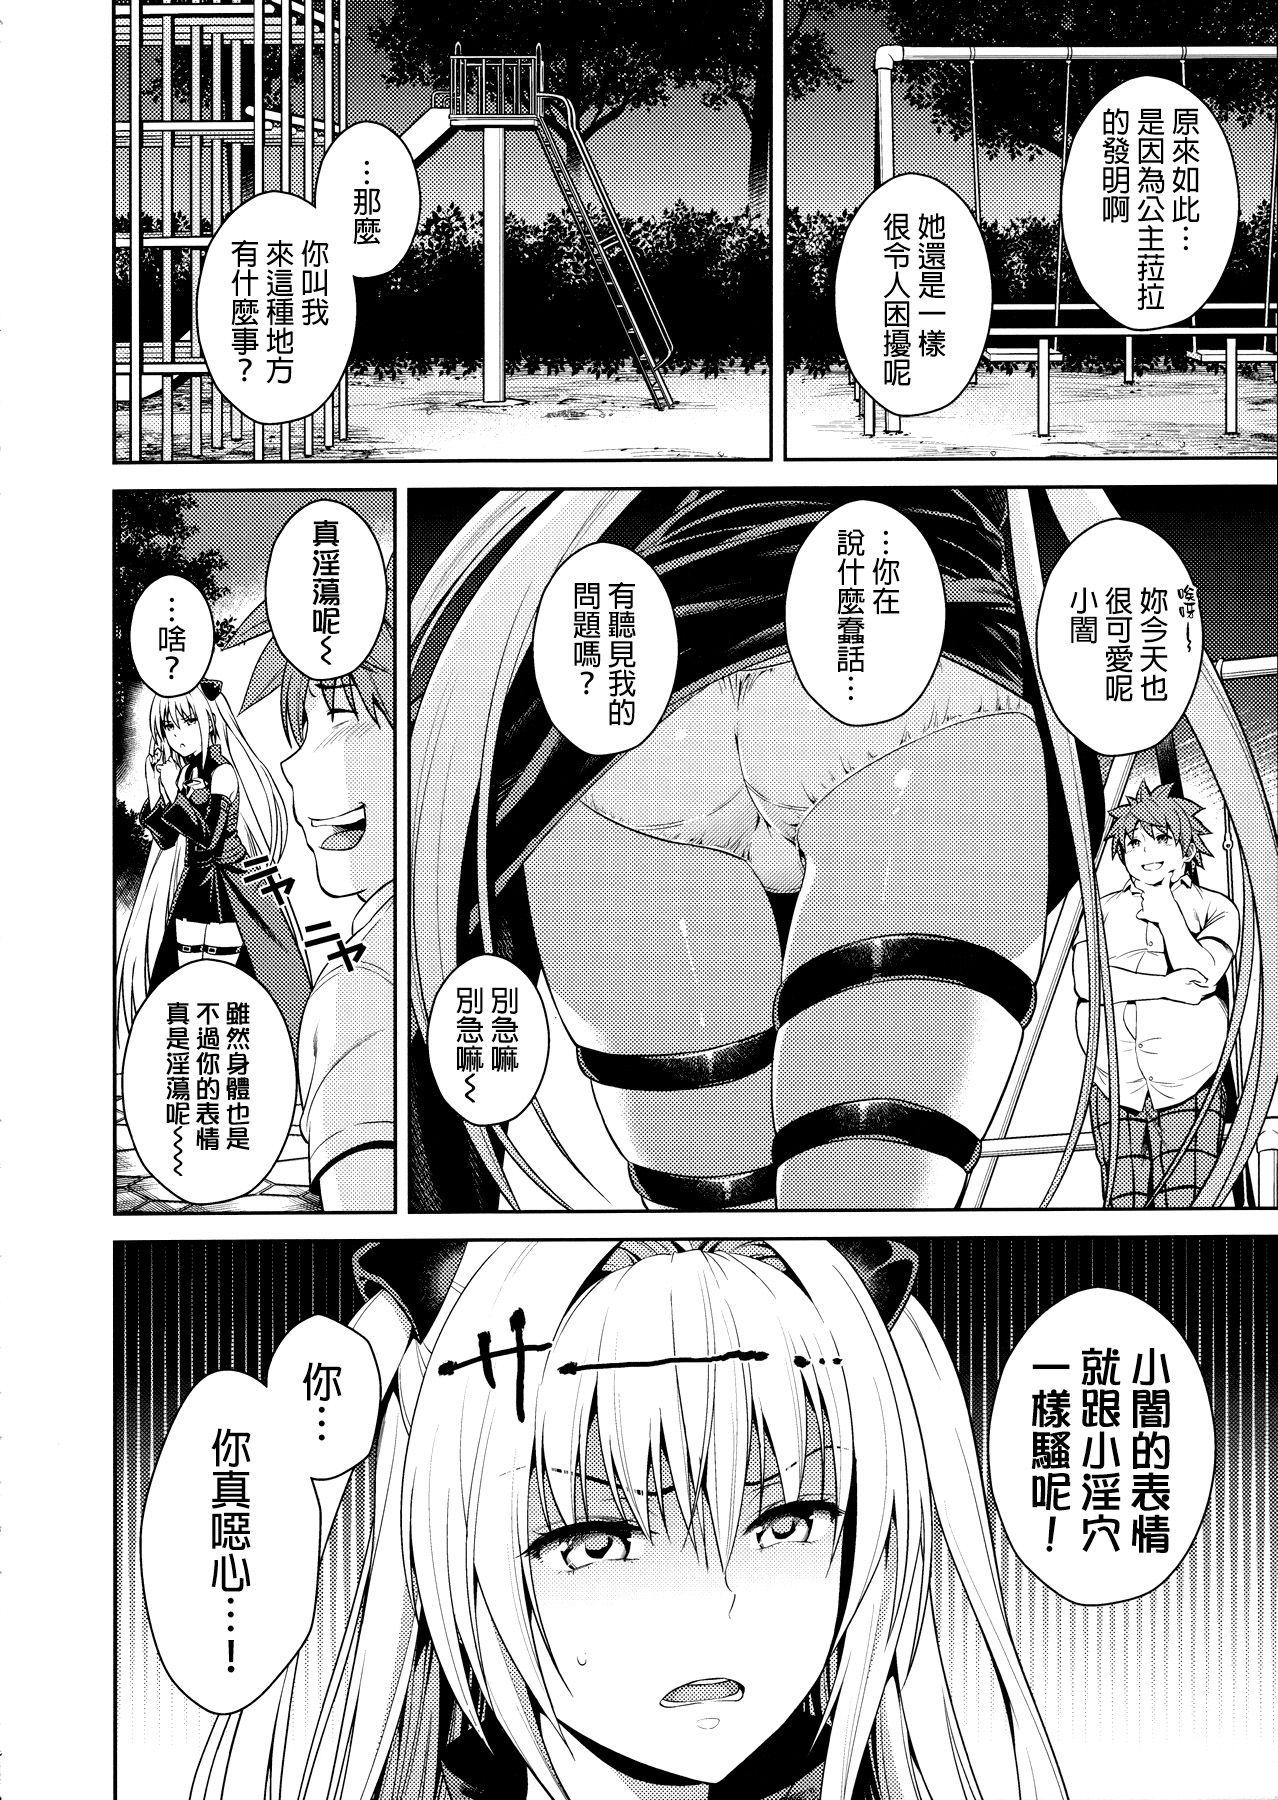 American Trans Generation - To love-ru Real Amatuer Porn - Page 5